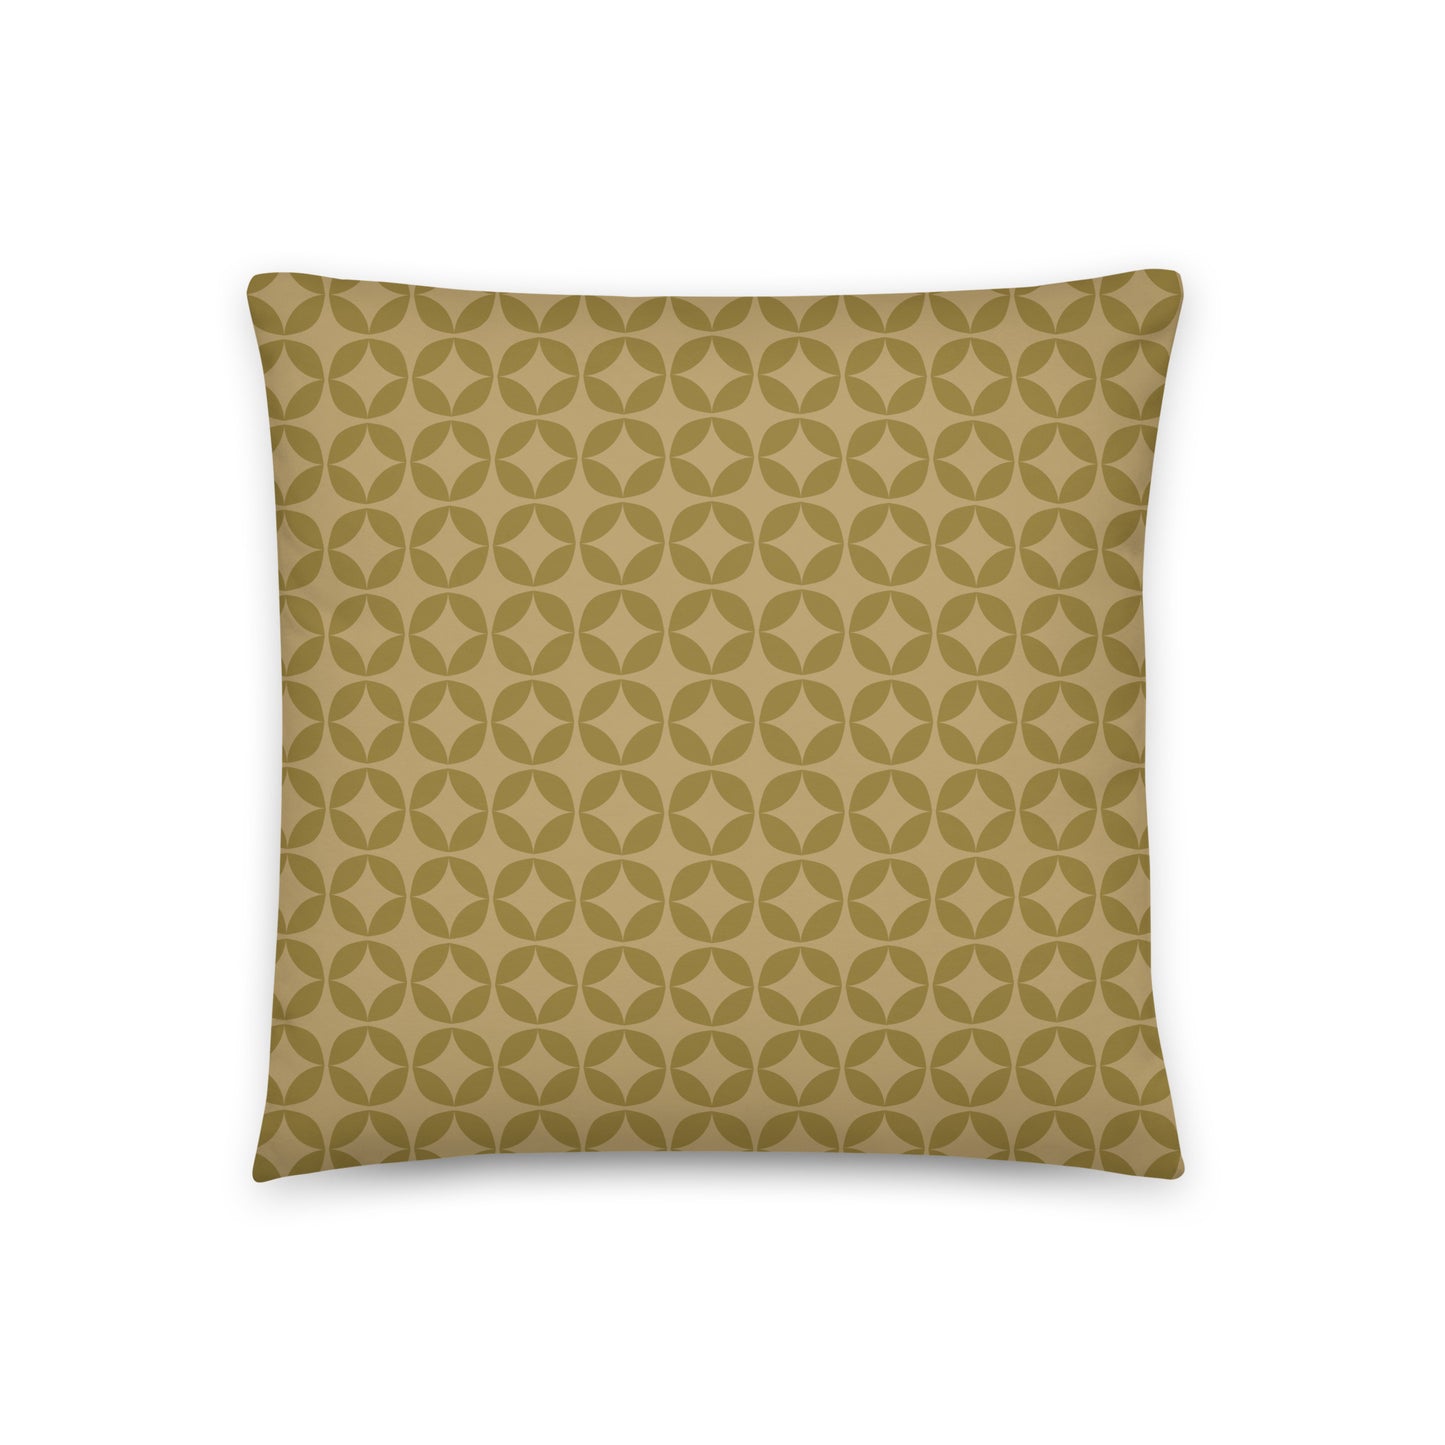 Wempy Dyocta Koto Signature Luxury - Sustainably Made Pillow